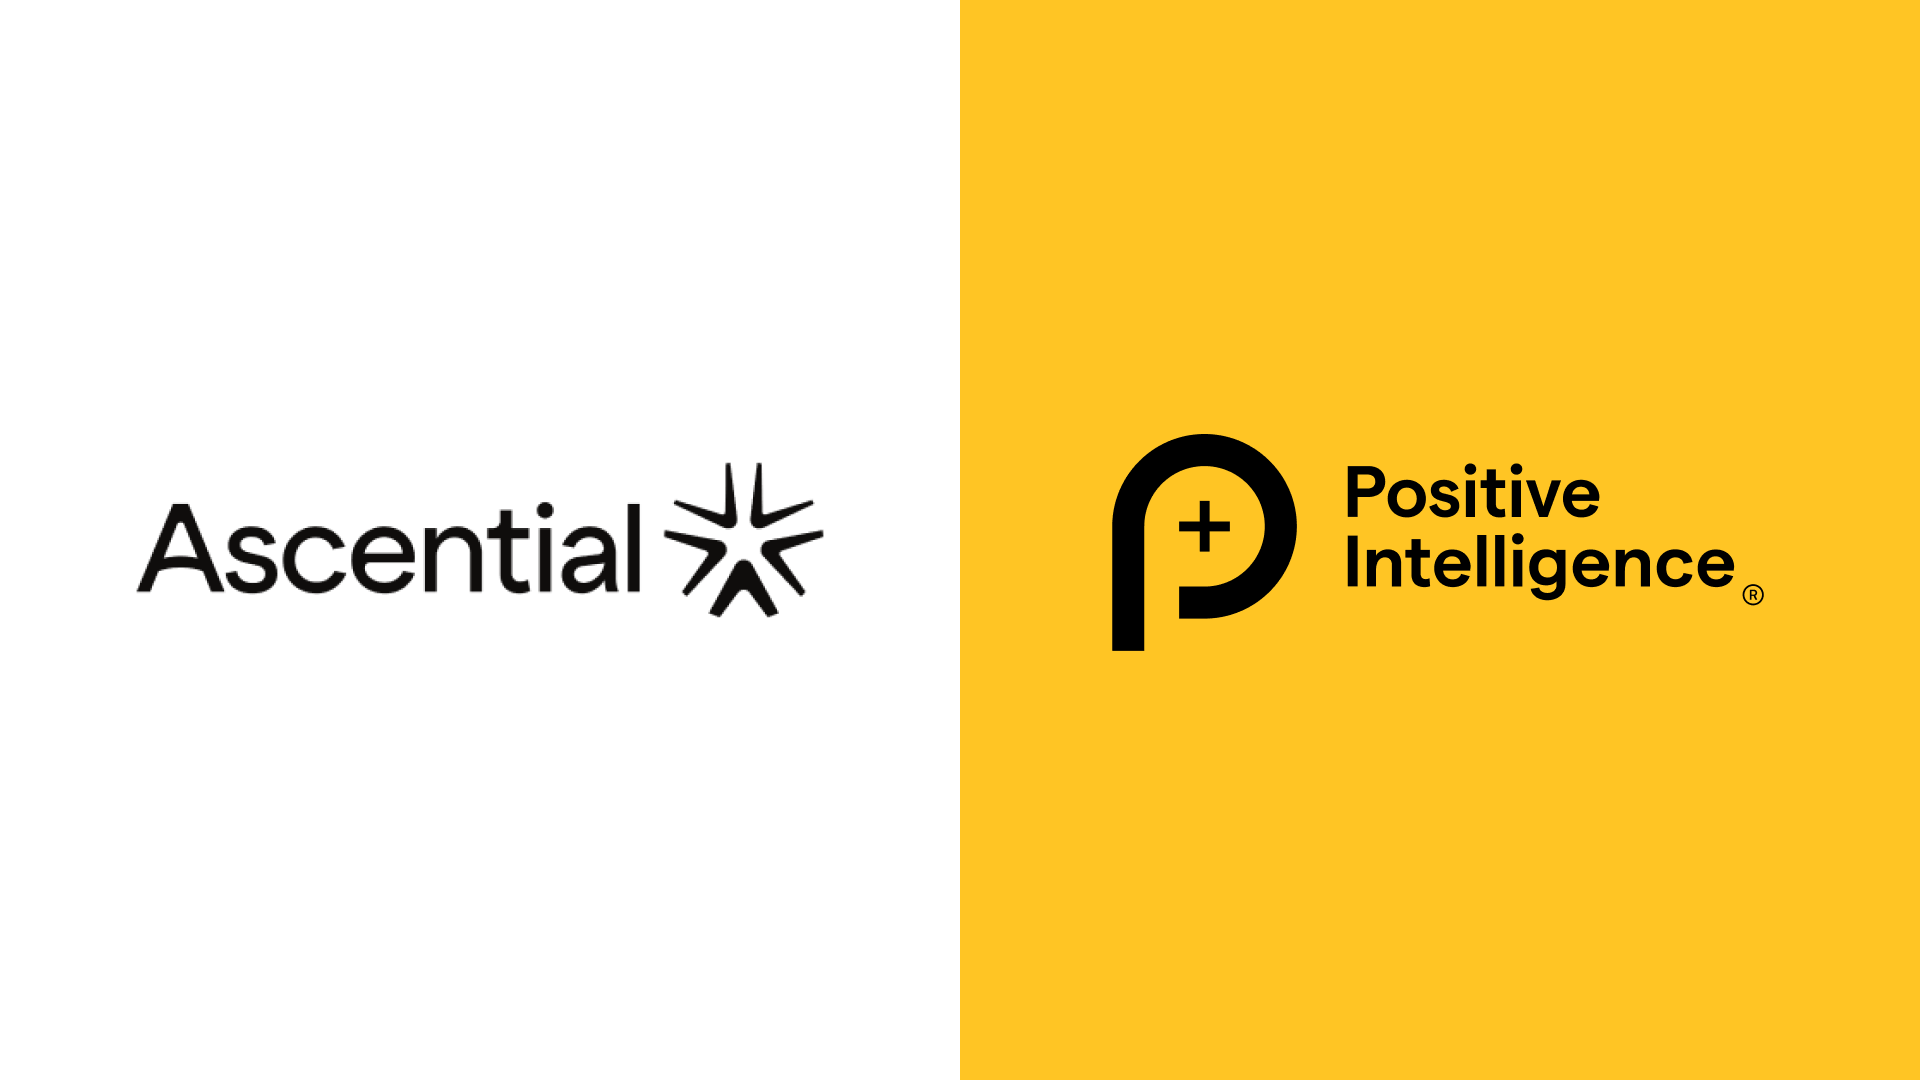 Ascential and Positive Intelligence logos